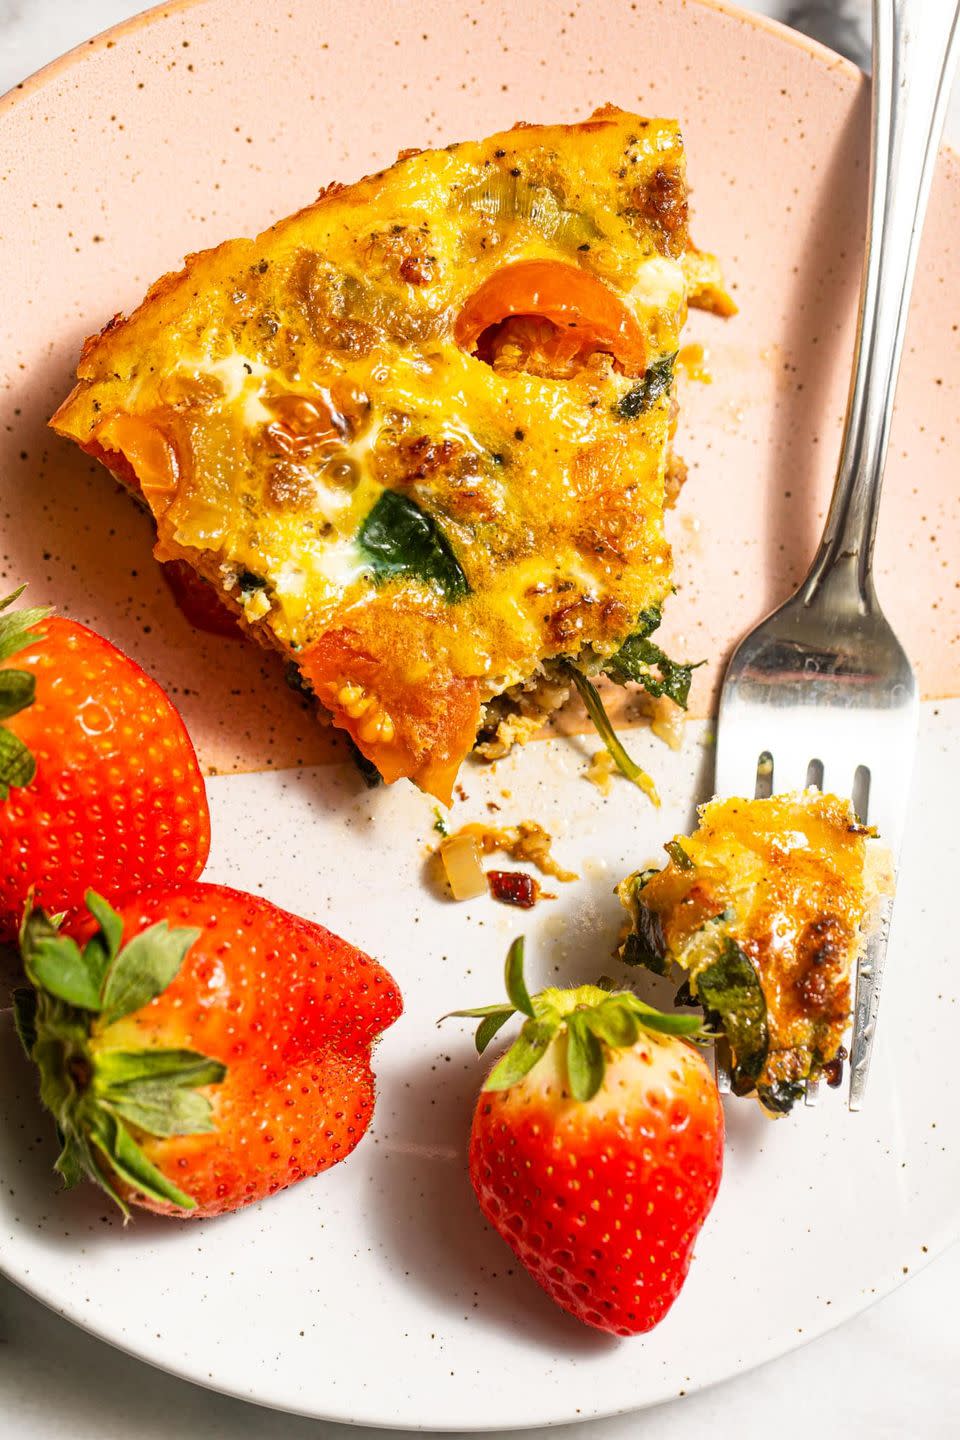 breakfast in bed slice of kitchen sink frittata with strawberries